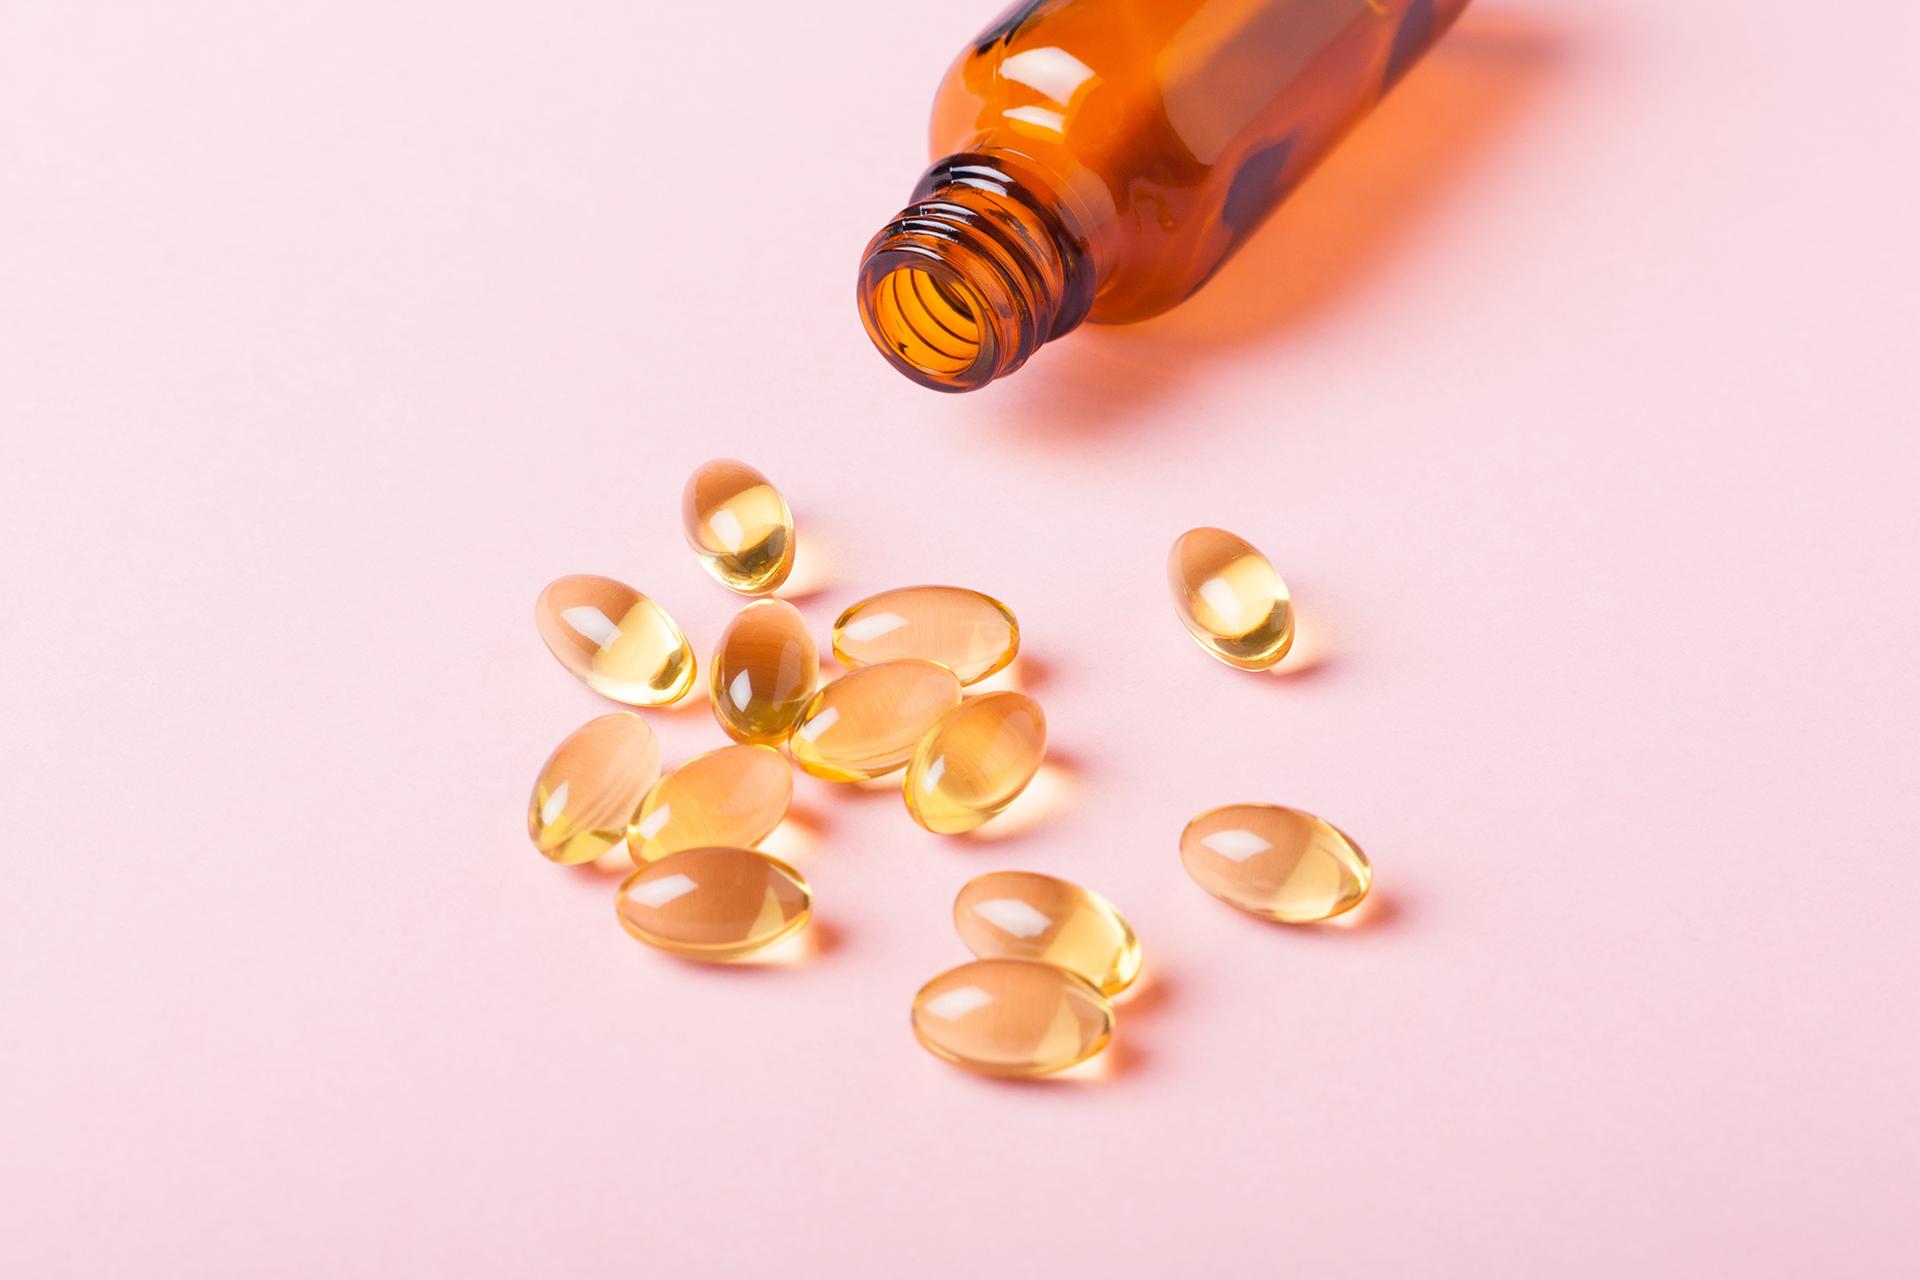 Fish Oil: Nutritional Facts, Health Benefits, Side Effects